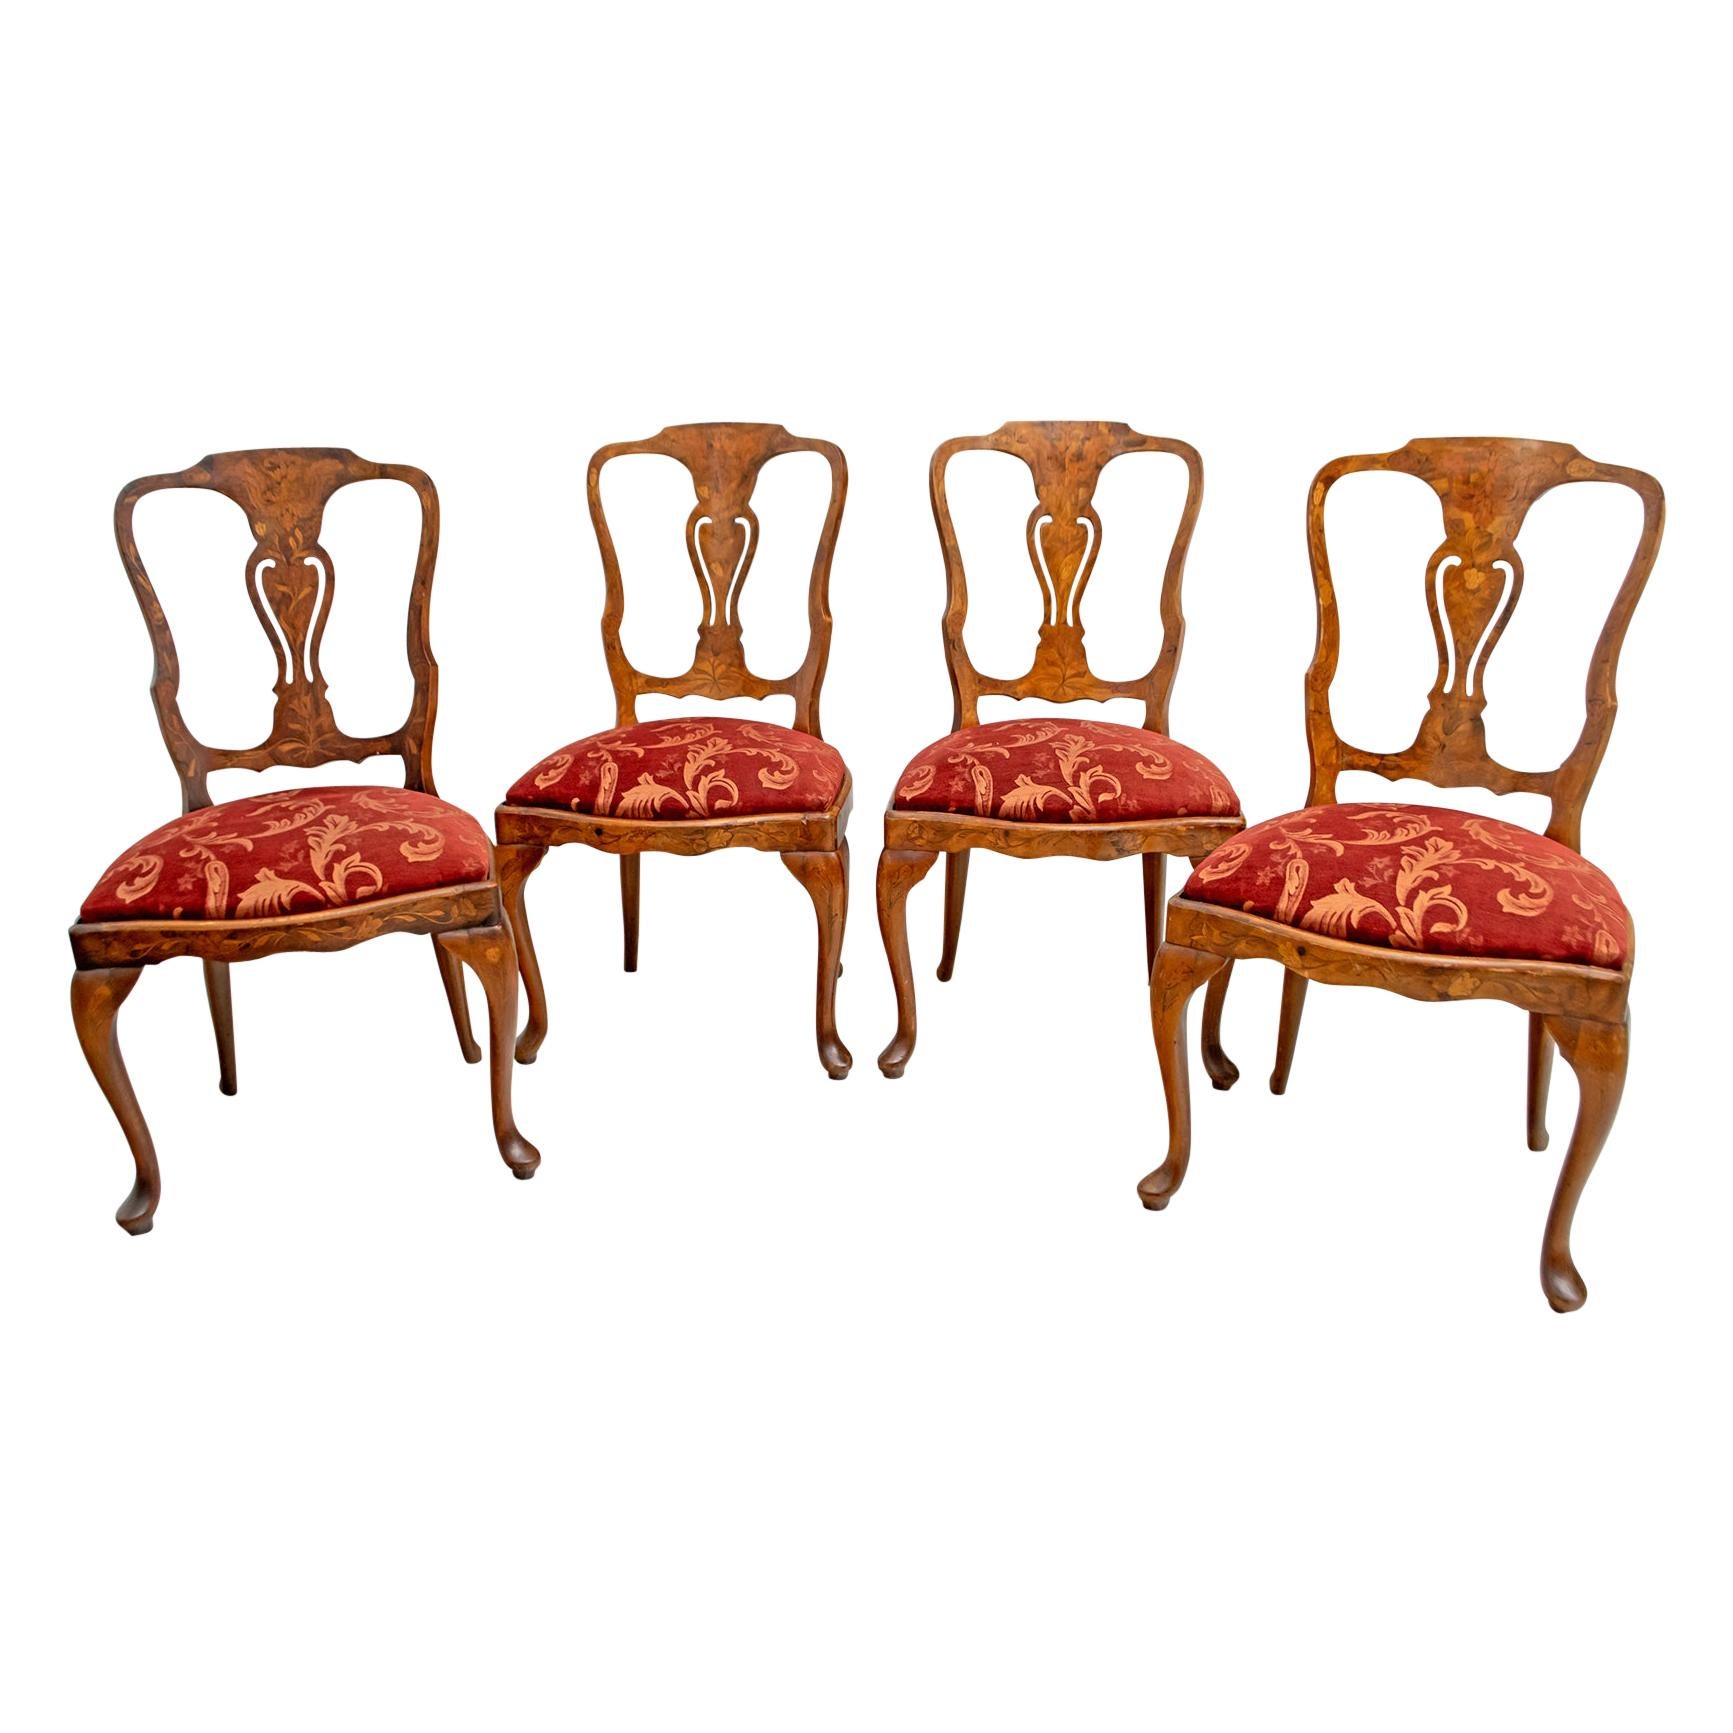 Walnut Dutch Chairs of the 20th Century with Maple Wood Inlays, Netherlands For Sale